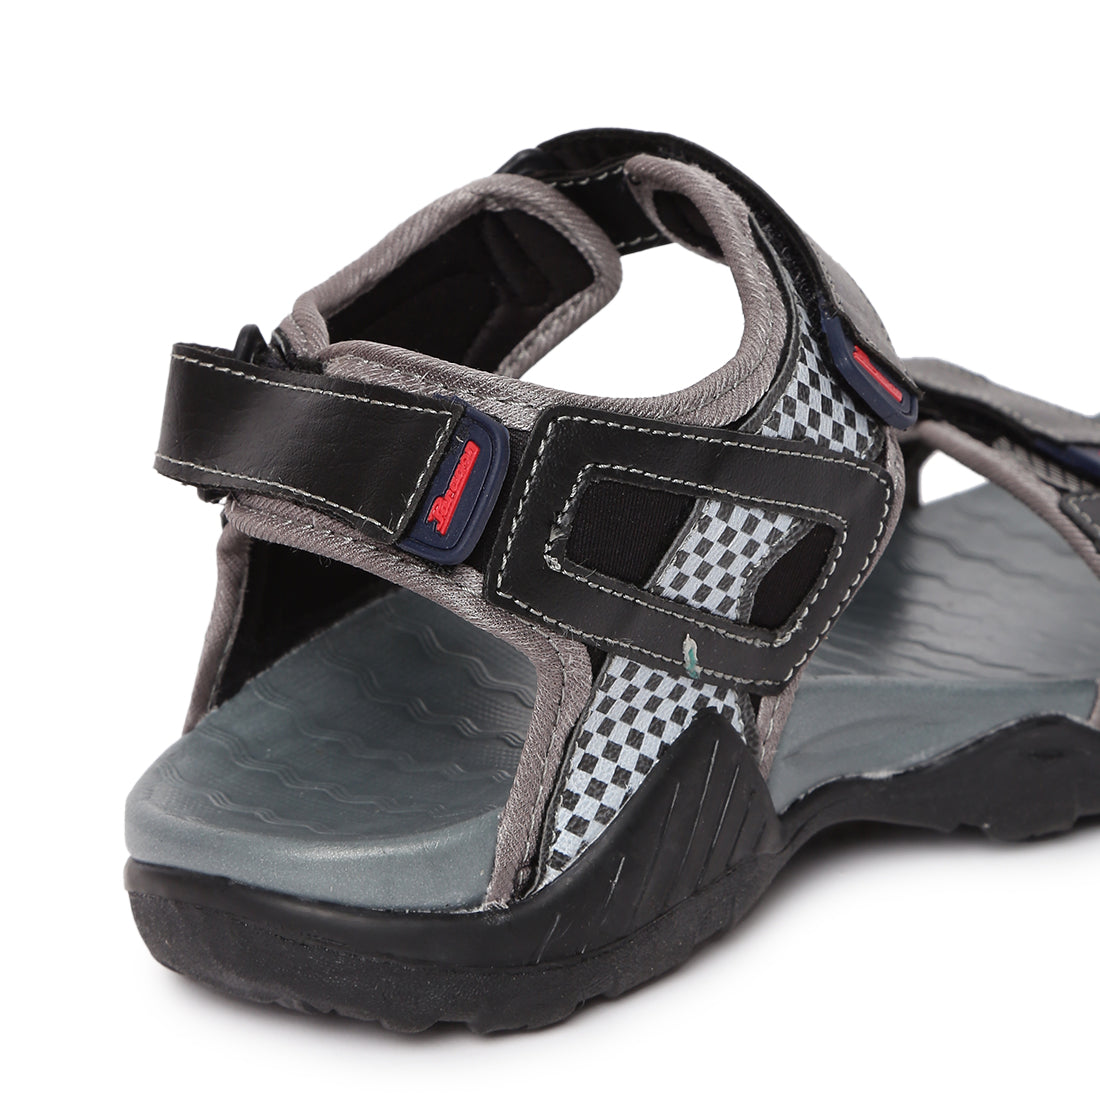 Paragon Casual Sandals for Men | Stylish Black Floater Sandals for Every Day Use